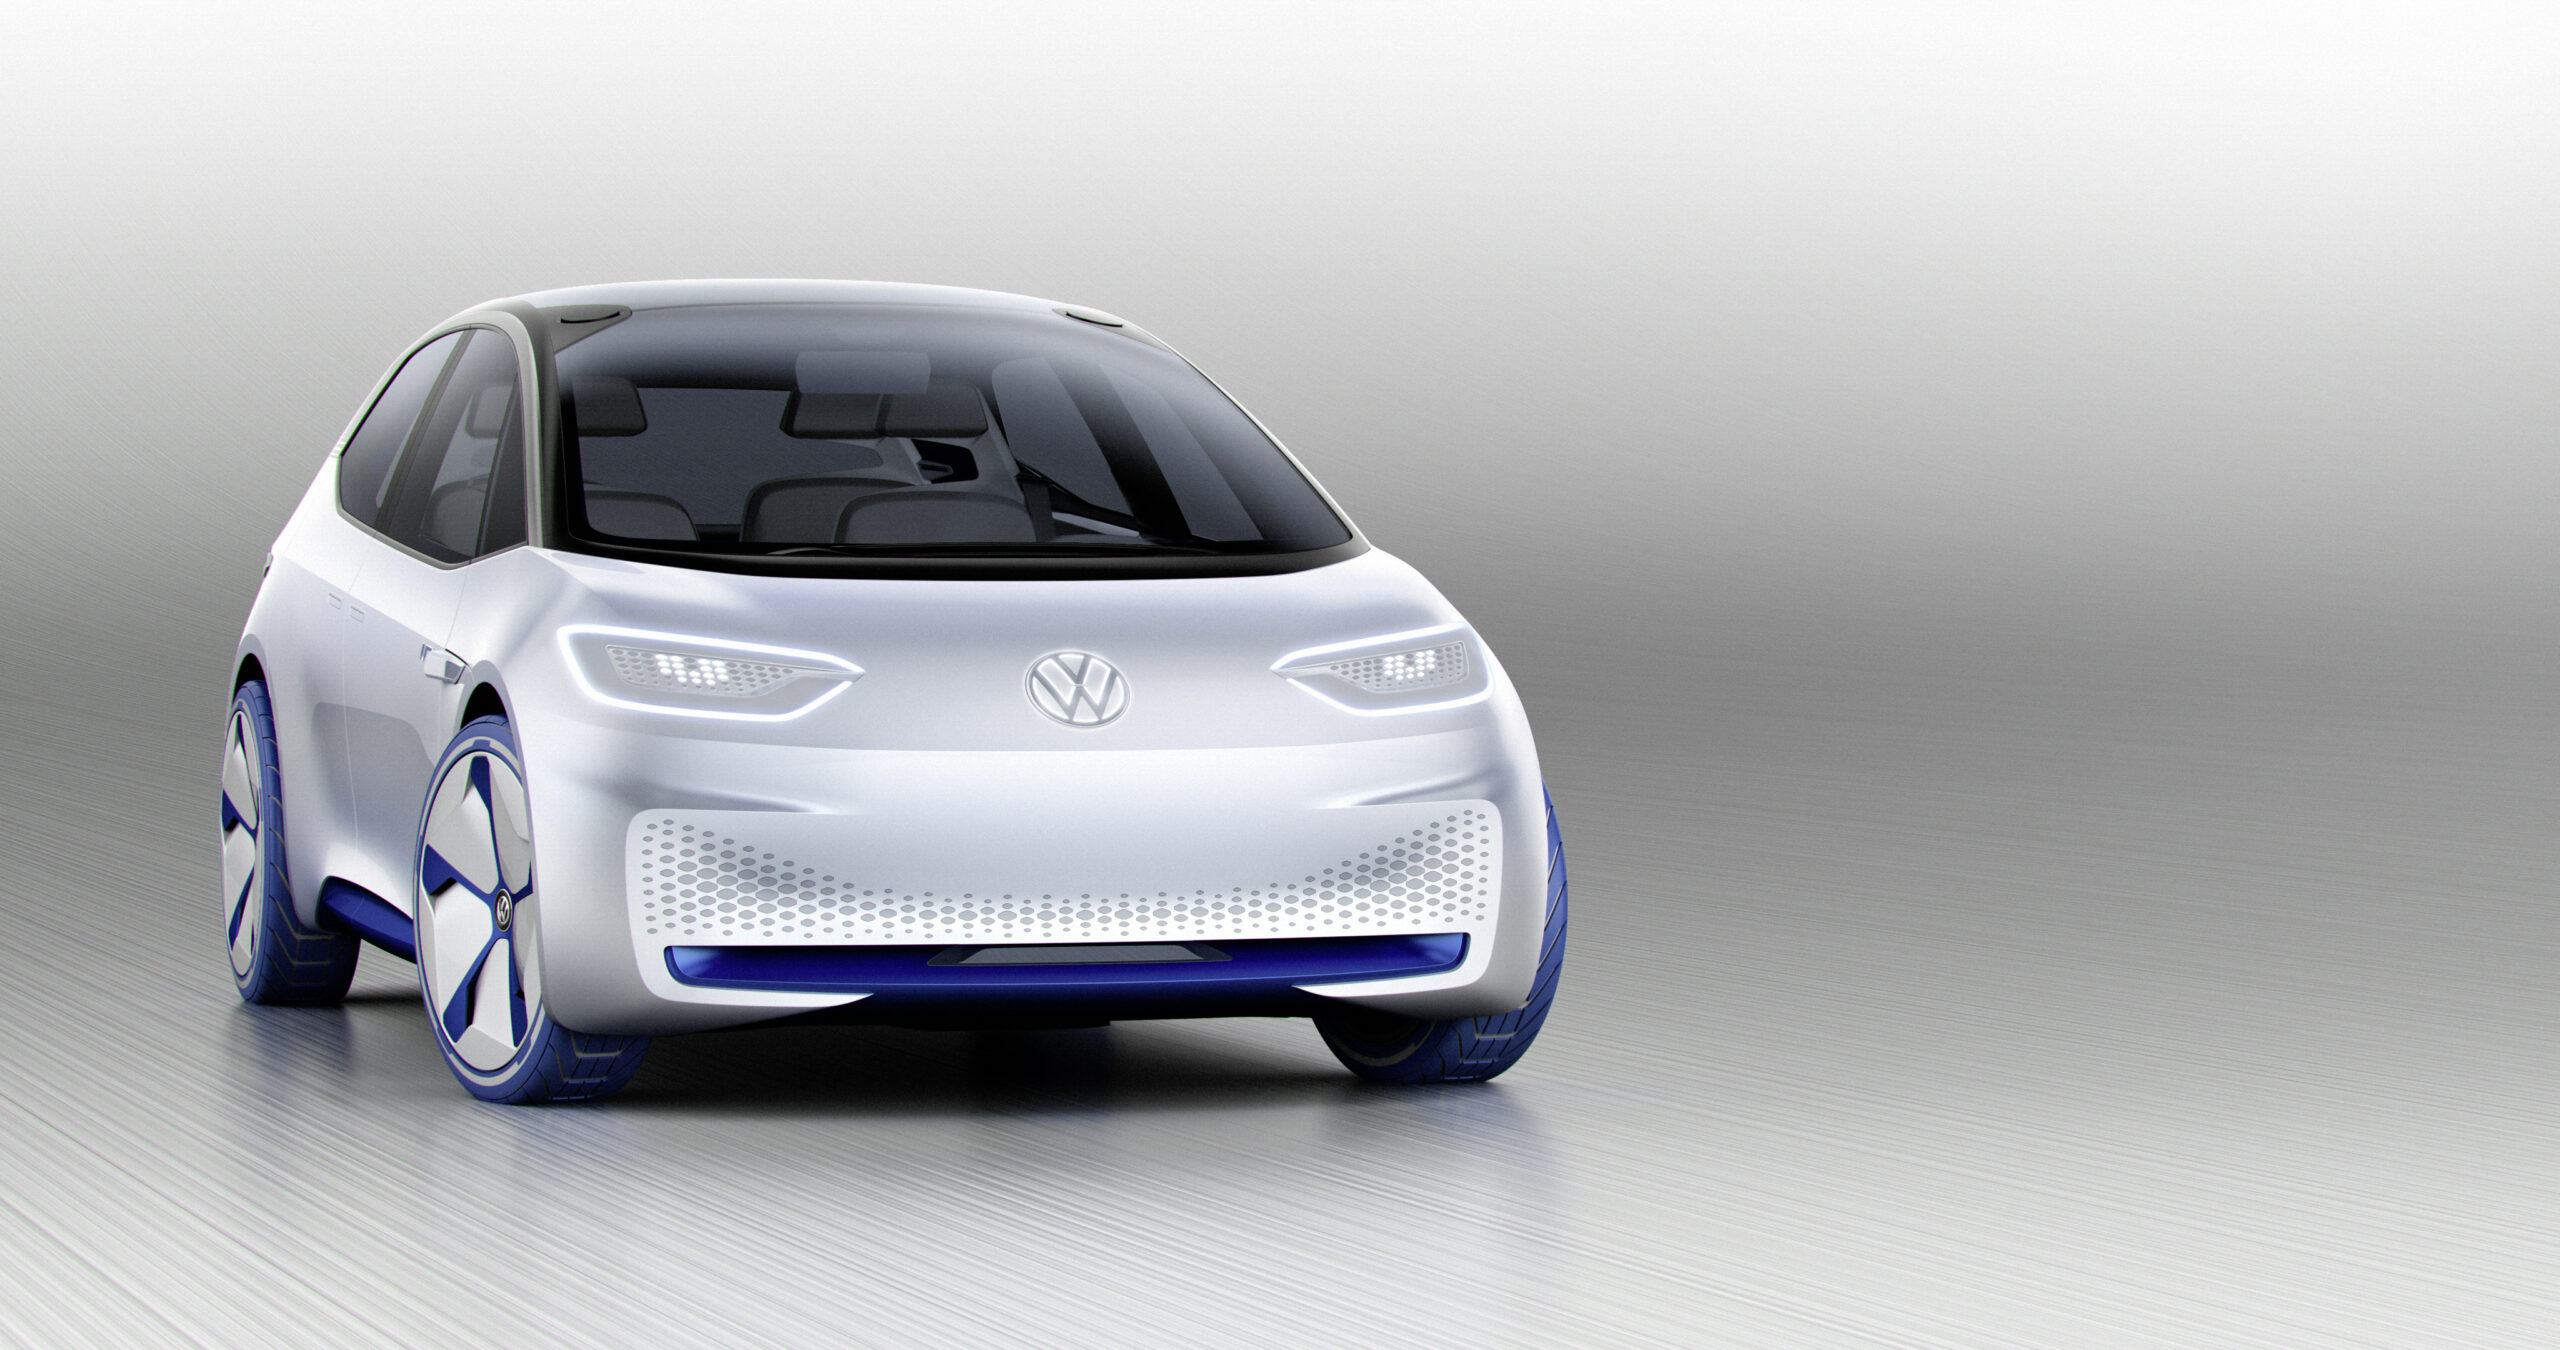 Volkswagen is ready to be a leader again